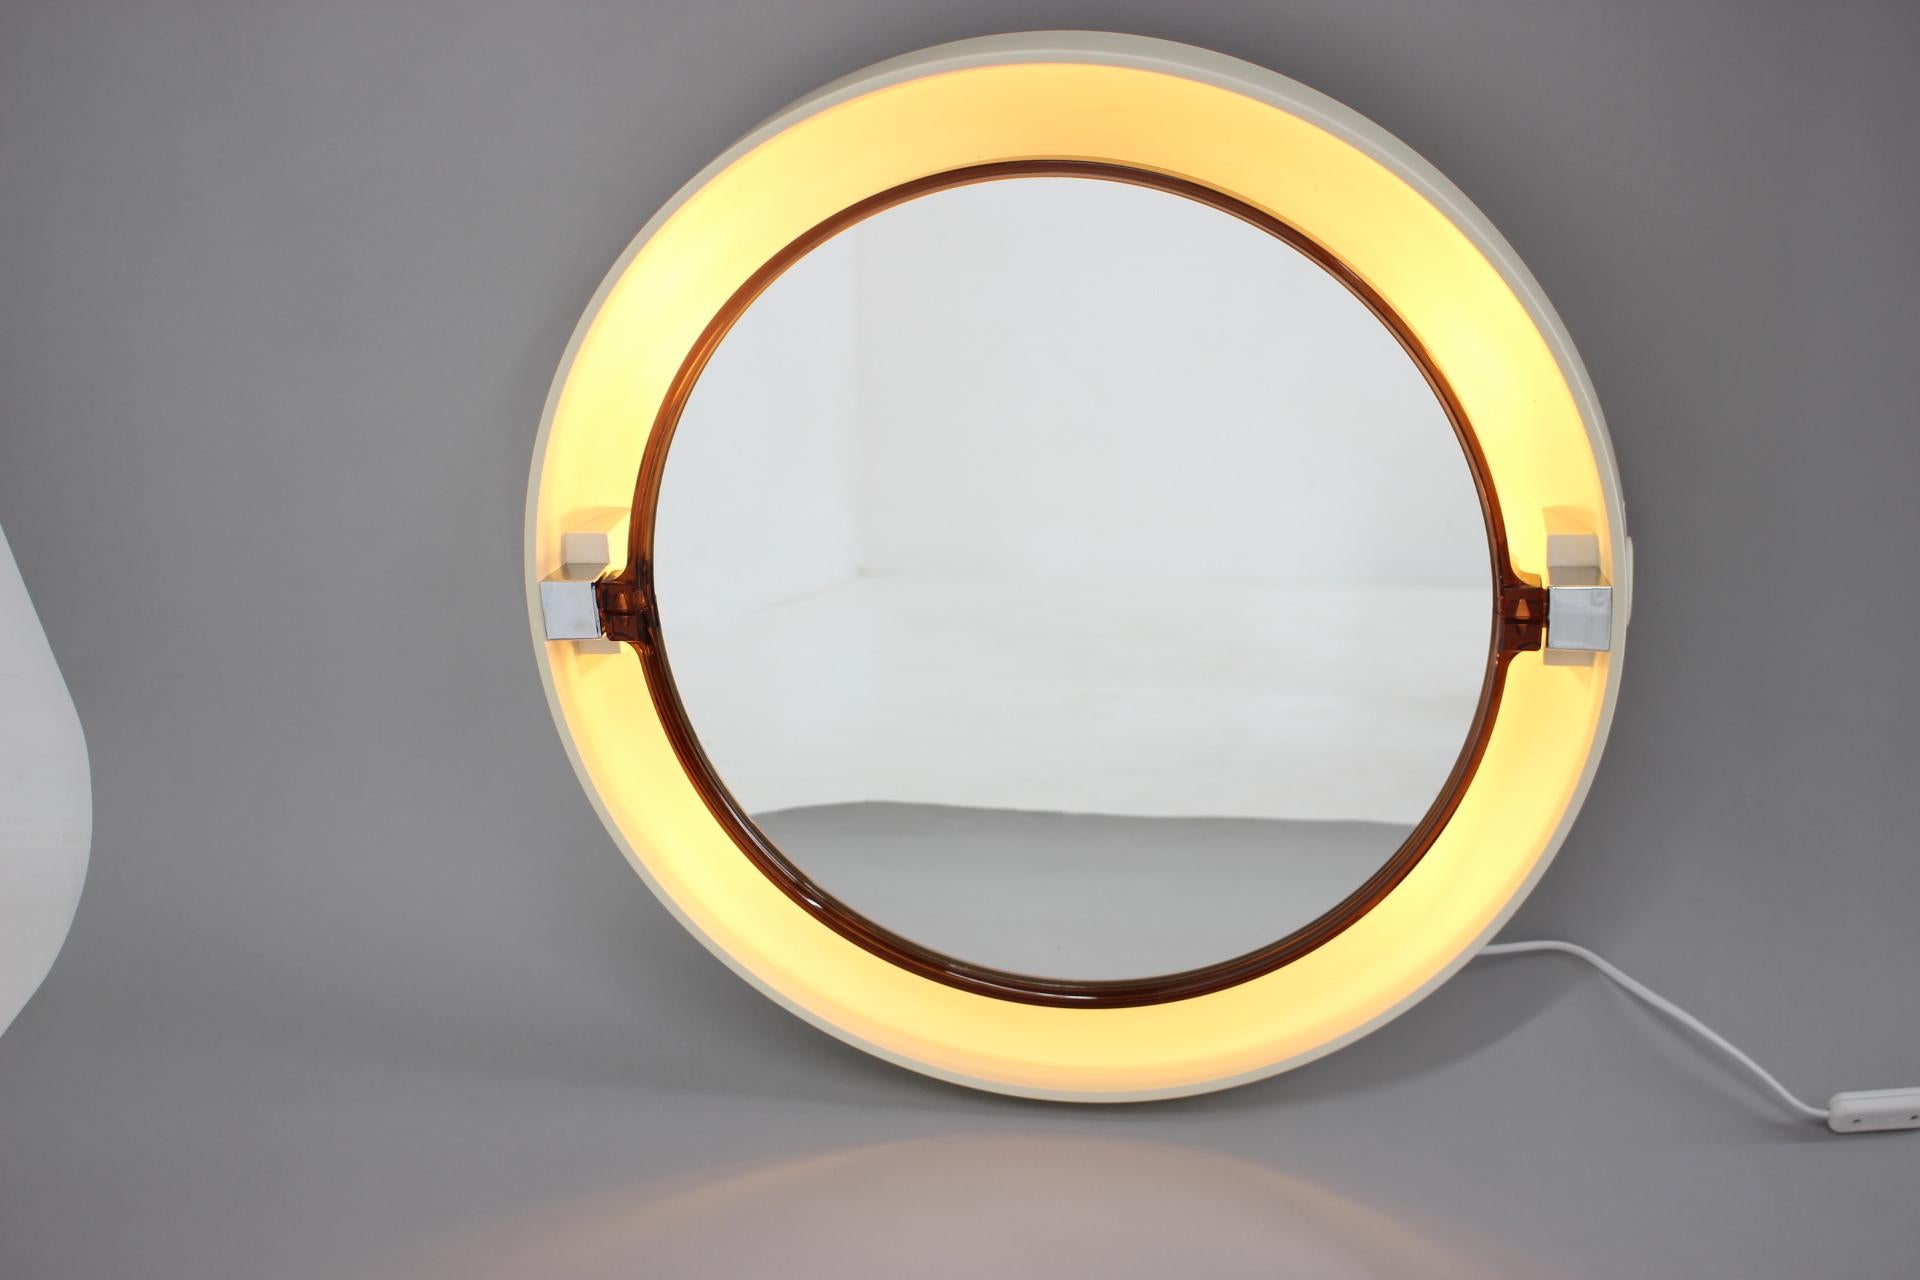 Large Midcentury Backlit Mirror Allibert, Italy, 1970s For Sale 5